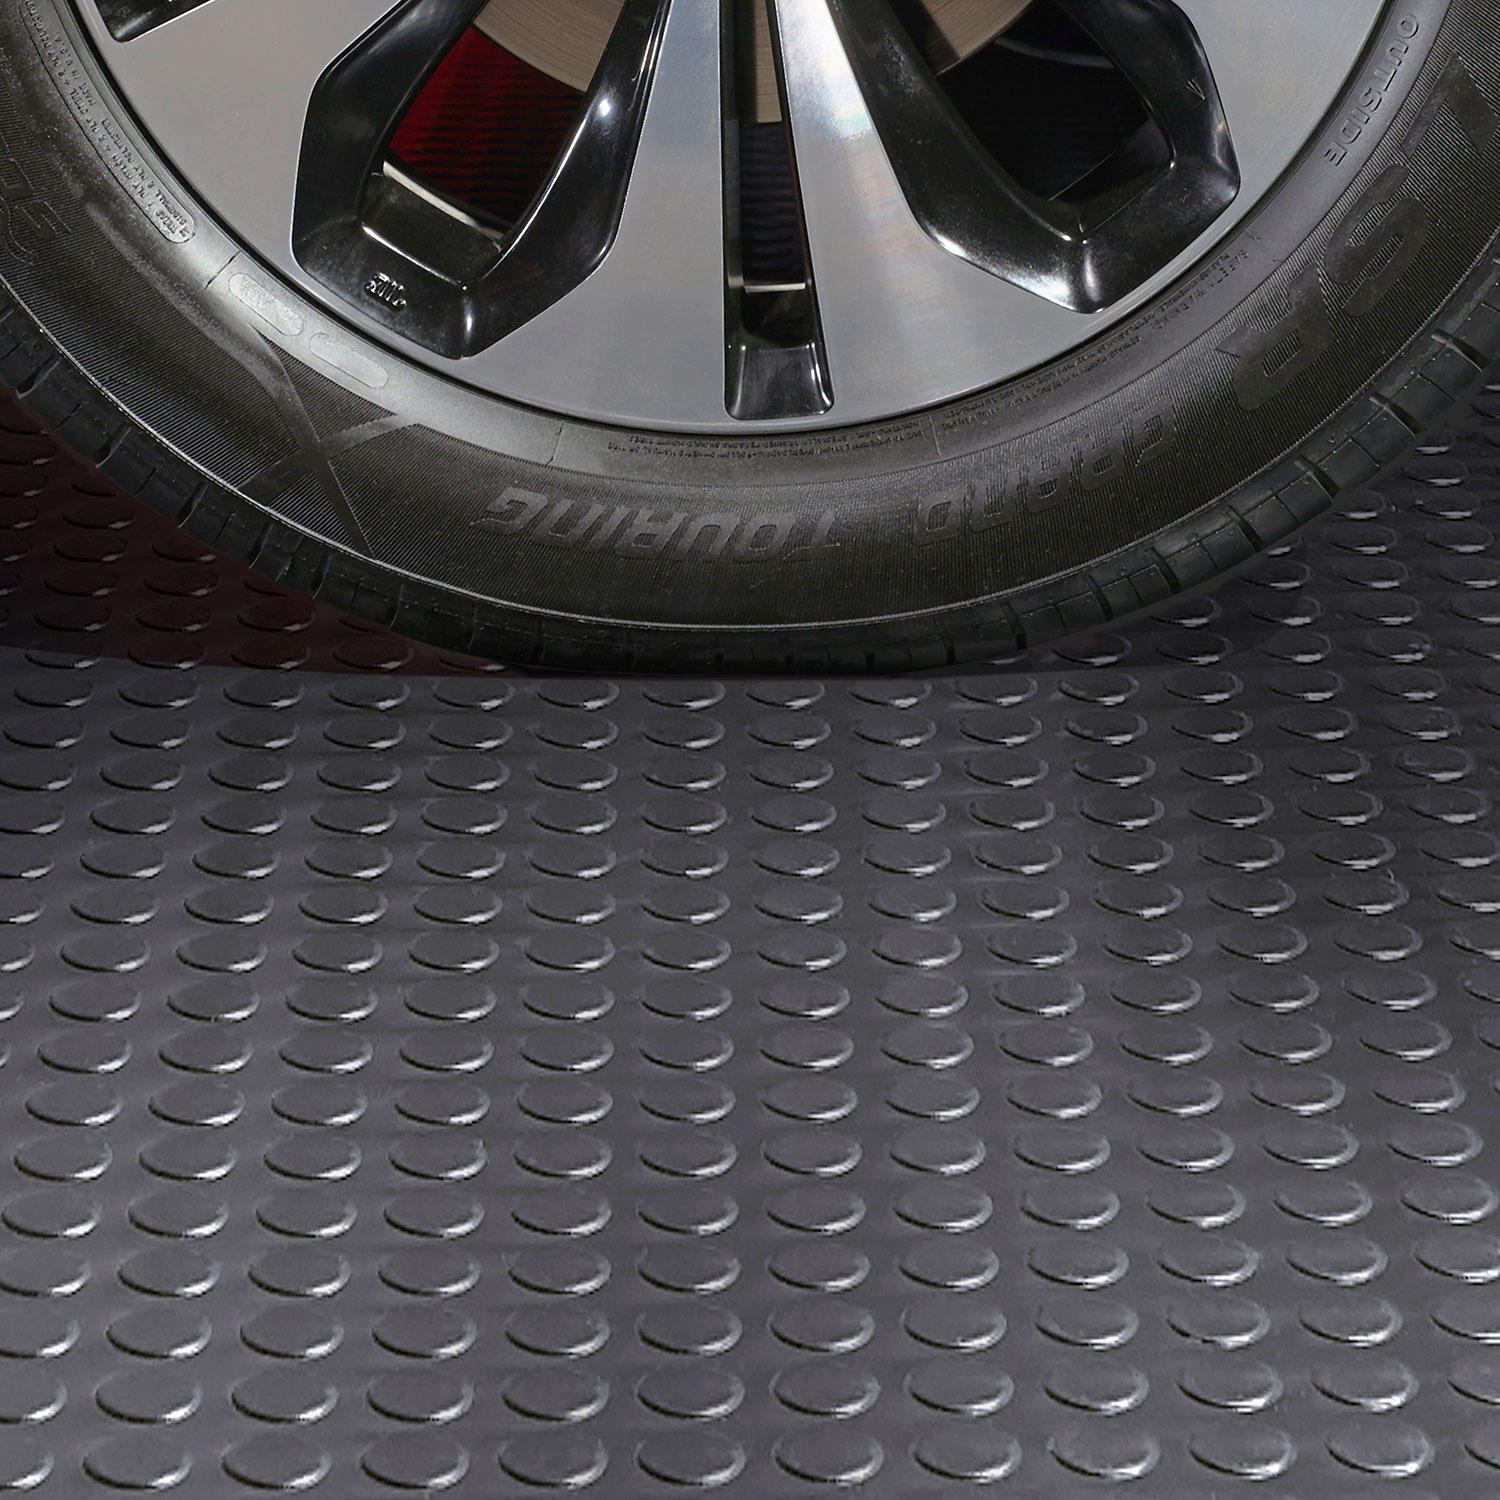 10 x 24 Garage and Utility Flooring - Coin Pattern, Slate Grey